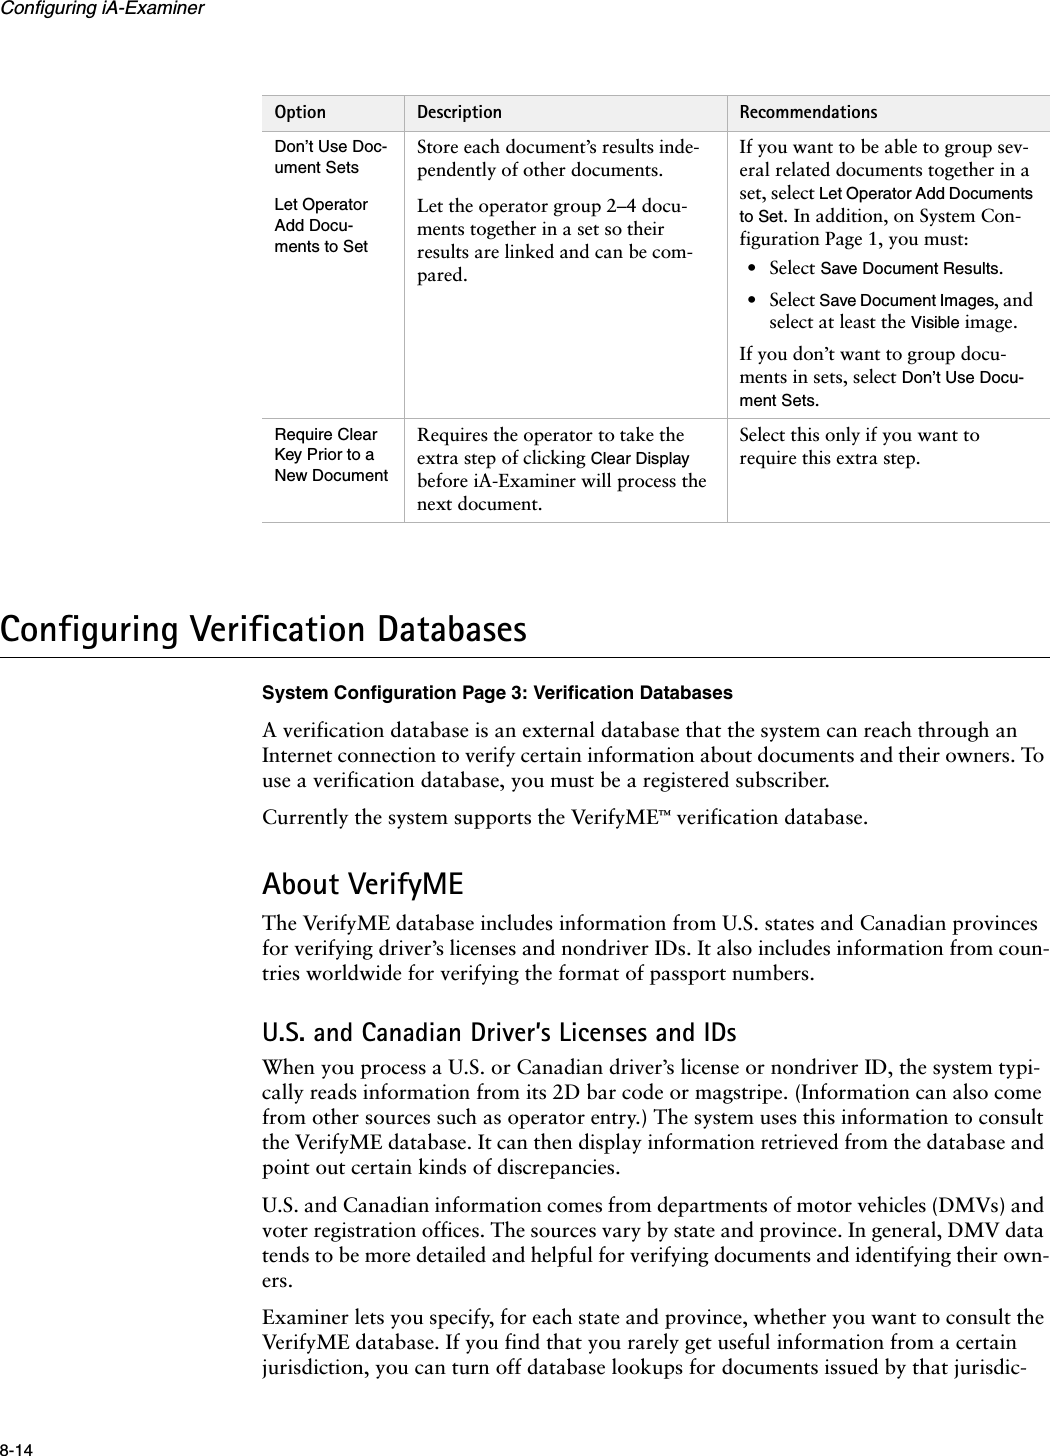 Configuring iA-Examiner8-14Configuring Verification DatabasesSystem Configuration Page 3: Verification DatabasesA verification database is an external database that the system can reach through an Internet connection to verify certain information about documents and their owners. To use a verification database, you must be a registered subscriber.Currently the system supports the VerifyME™ verification database.About VerifyMEThe VerifyME database includes information from U.S. states and Canadian provinces for verifying driver’s licenses and nondriver IDs. It also includes information from coun-tries worldwide for verifying the format of passport numbers.U.S. and Canadian Driver’s Licenses and IDsWhen you process a U.S. or Canadian driver’s license or nondriver ID, the system typi-cally reads information from its 2D bar code or magstripe. (Information can also come from other sources such as operator entry.) The system uses this information to consult the VerifyME database. It can then display information retrieved from the database and point out certain kinds of discrepancies.U.S. and Canadian information comes from departments of motor vehicles (DMVs) and voter registration offices. The sources vary by state and province. In general, DMV data tends to be more detailed and helpful for verifying documents and identifying their own-ers.Examiner lets you specify, for each state and province, whether you want to consult the VerifyME database. If you find that you rarely get useful information from a certain jurisdiction, you can turn off database lookups for documents issued by that jurisdic-Don’t Use Doc-ument SetsStore each document’s results inde-pendently of other documents.If you want to be able to group sev-eral related documents together in a set, select Let Operator Add Documents to Set. In addition, on System Con-figuration Page 1, you must:• Select Save Document Results.• Select Save Document Images, and select at least the Visible image.If you don’t want to group docu-ments in sets, select Don’t Use Docu-ment Sets.Let Operator Add Docu-ments to SetLet the operator group 2–4 docu-ments together in a set so their results are linked and can be com-pared.Require Clear Key Prior to a New DocumentRequires the operator to take the extra step of clicking Clear Display before iA-Examiner will process the next document.Select this only if you want to require this extra step.Option Description Recommendations